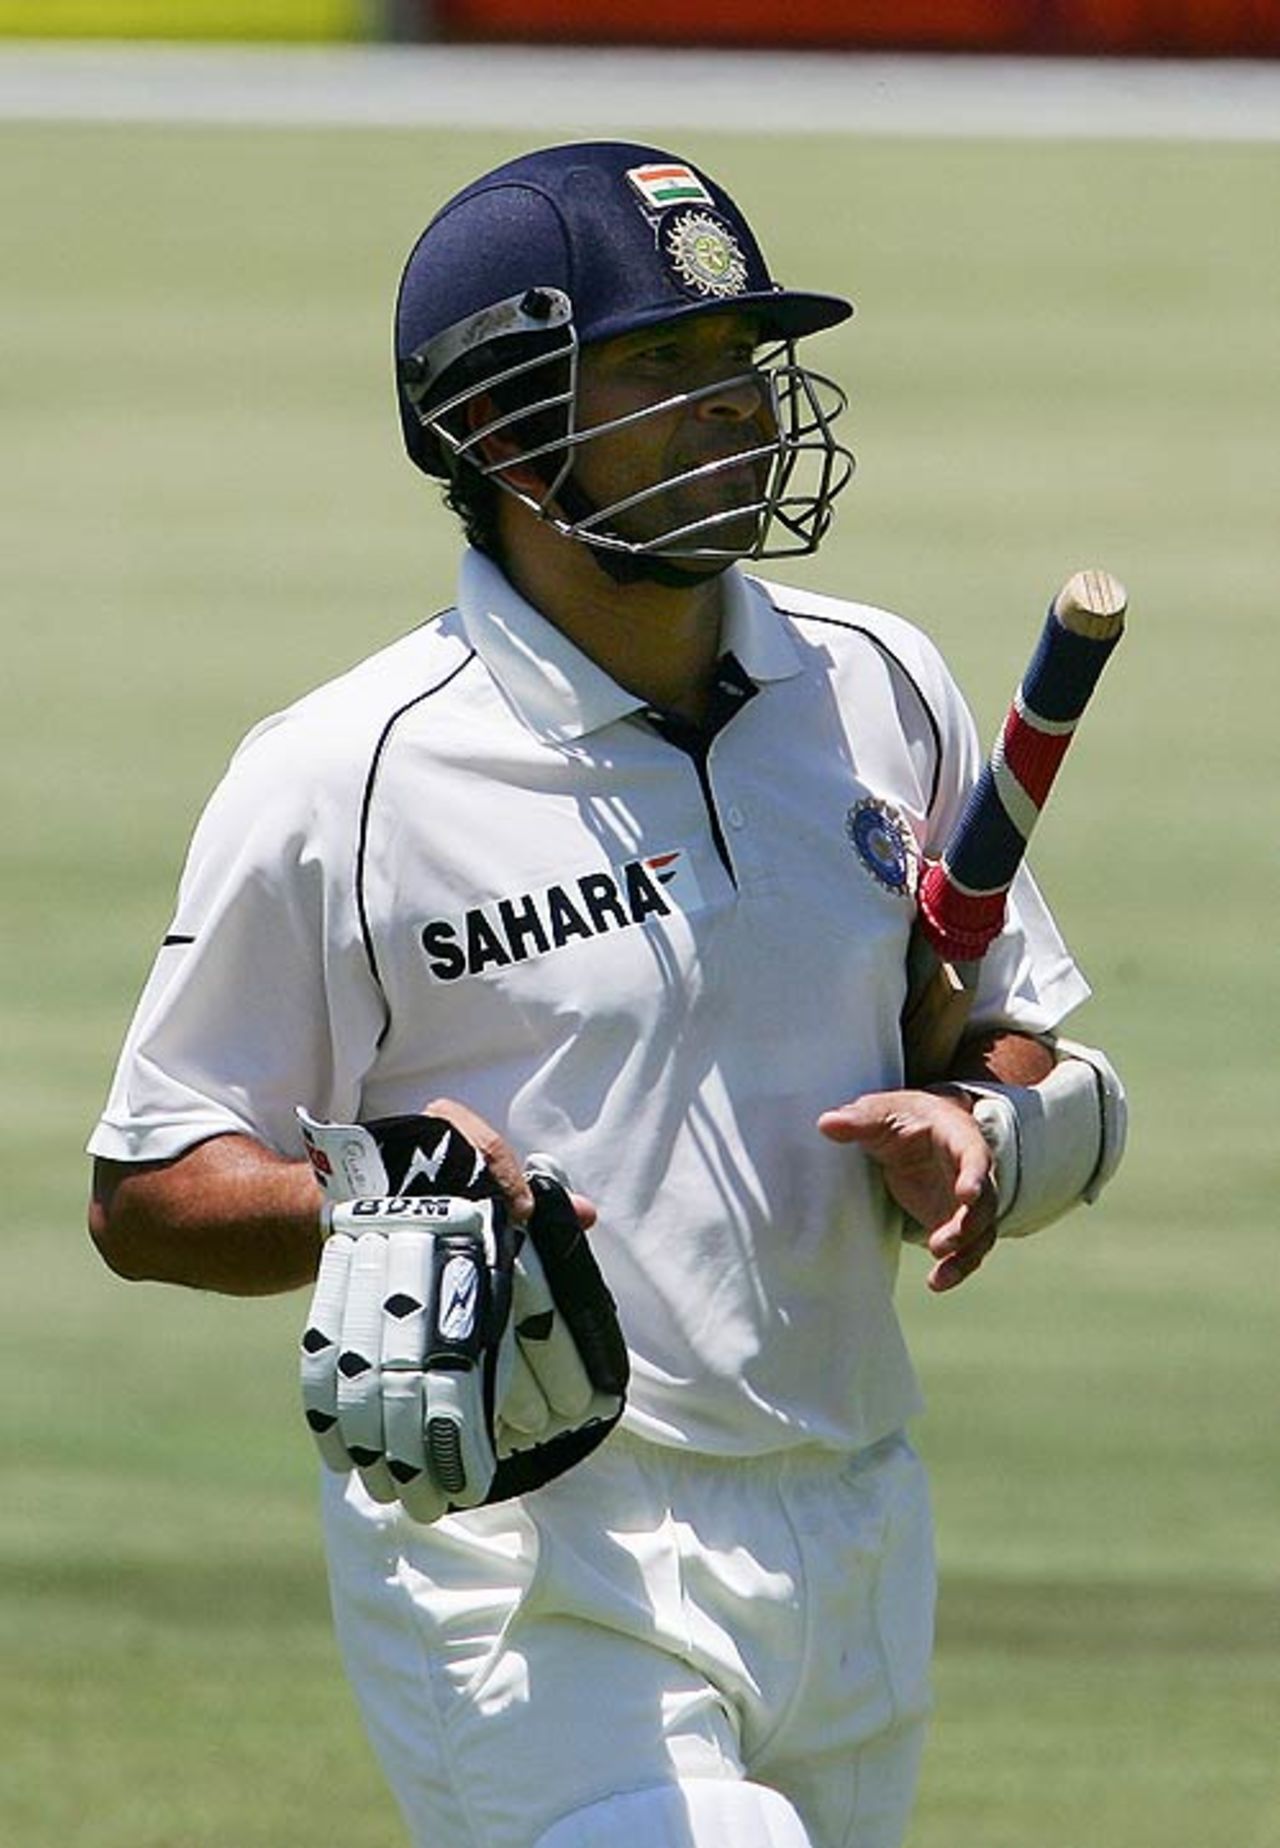 India are three down as Sachin Tendulkar walks back after scoring 10, Rest of South Africa v Indians, Potchefstroom, 1st day, December 7, 2006